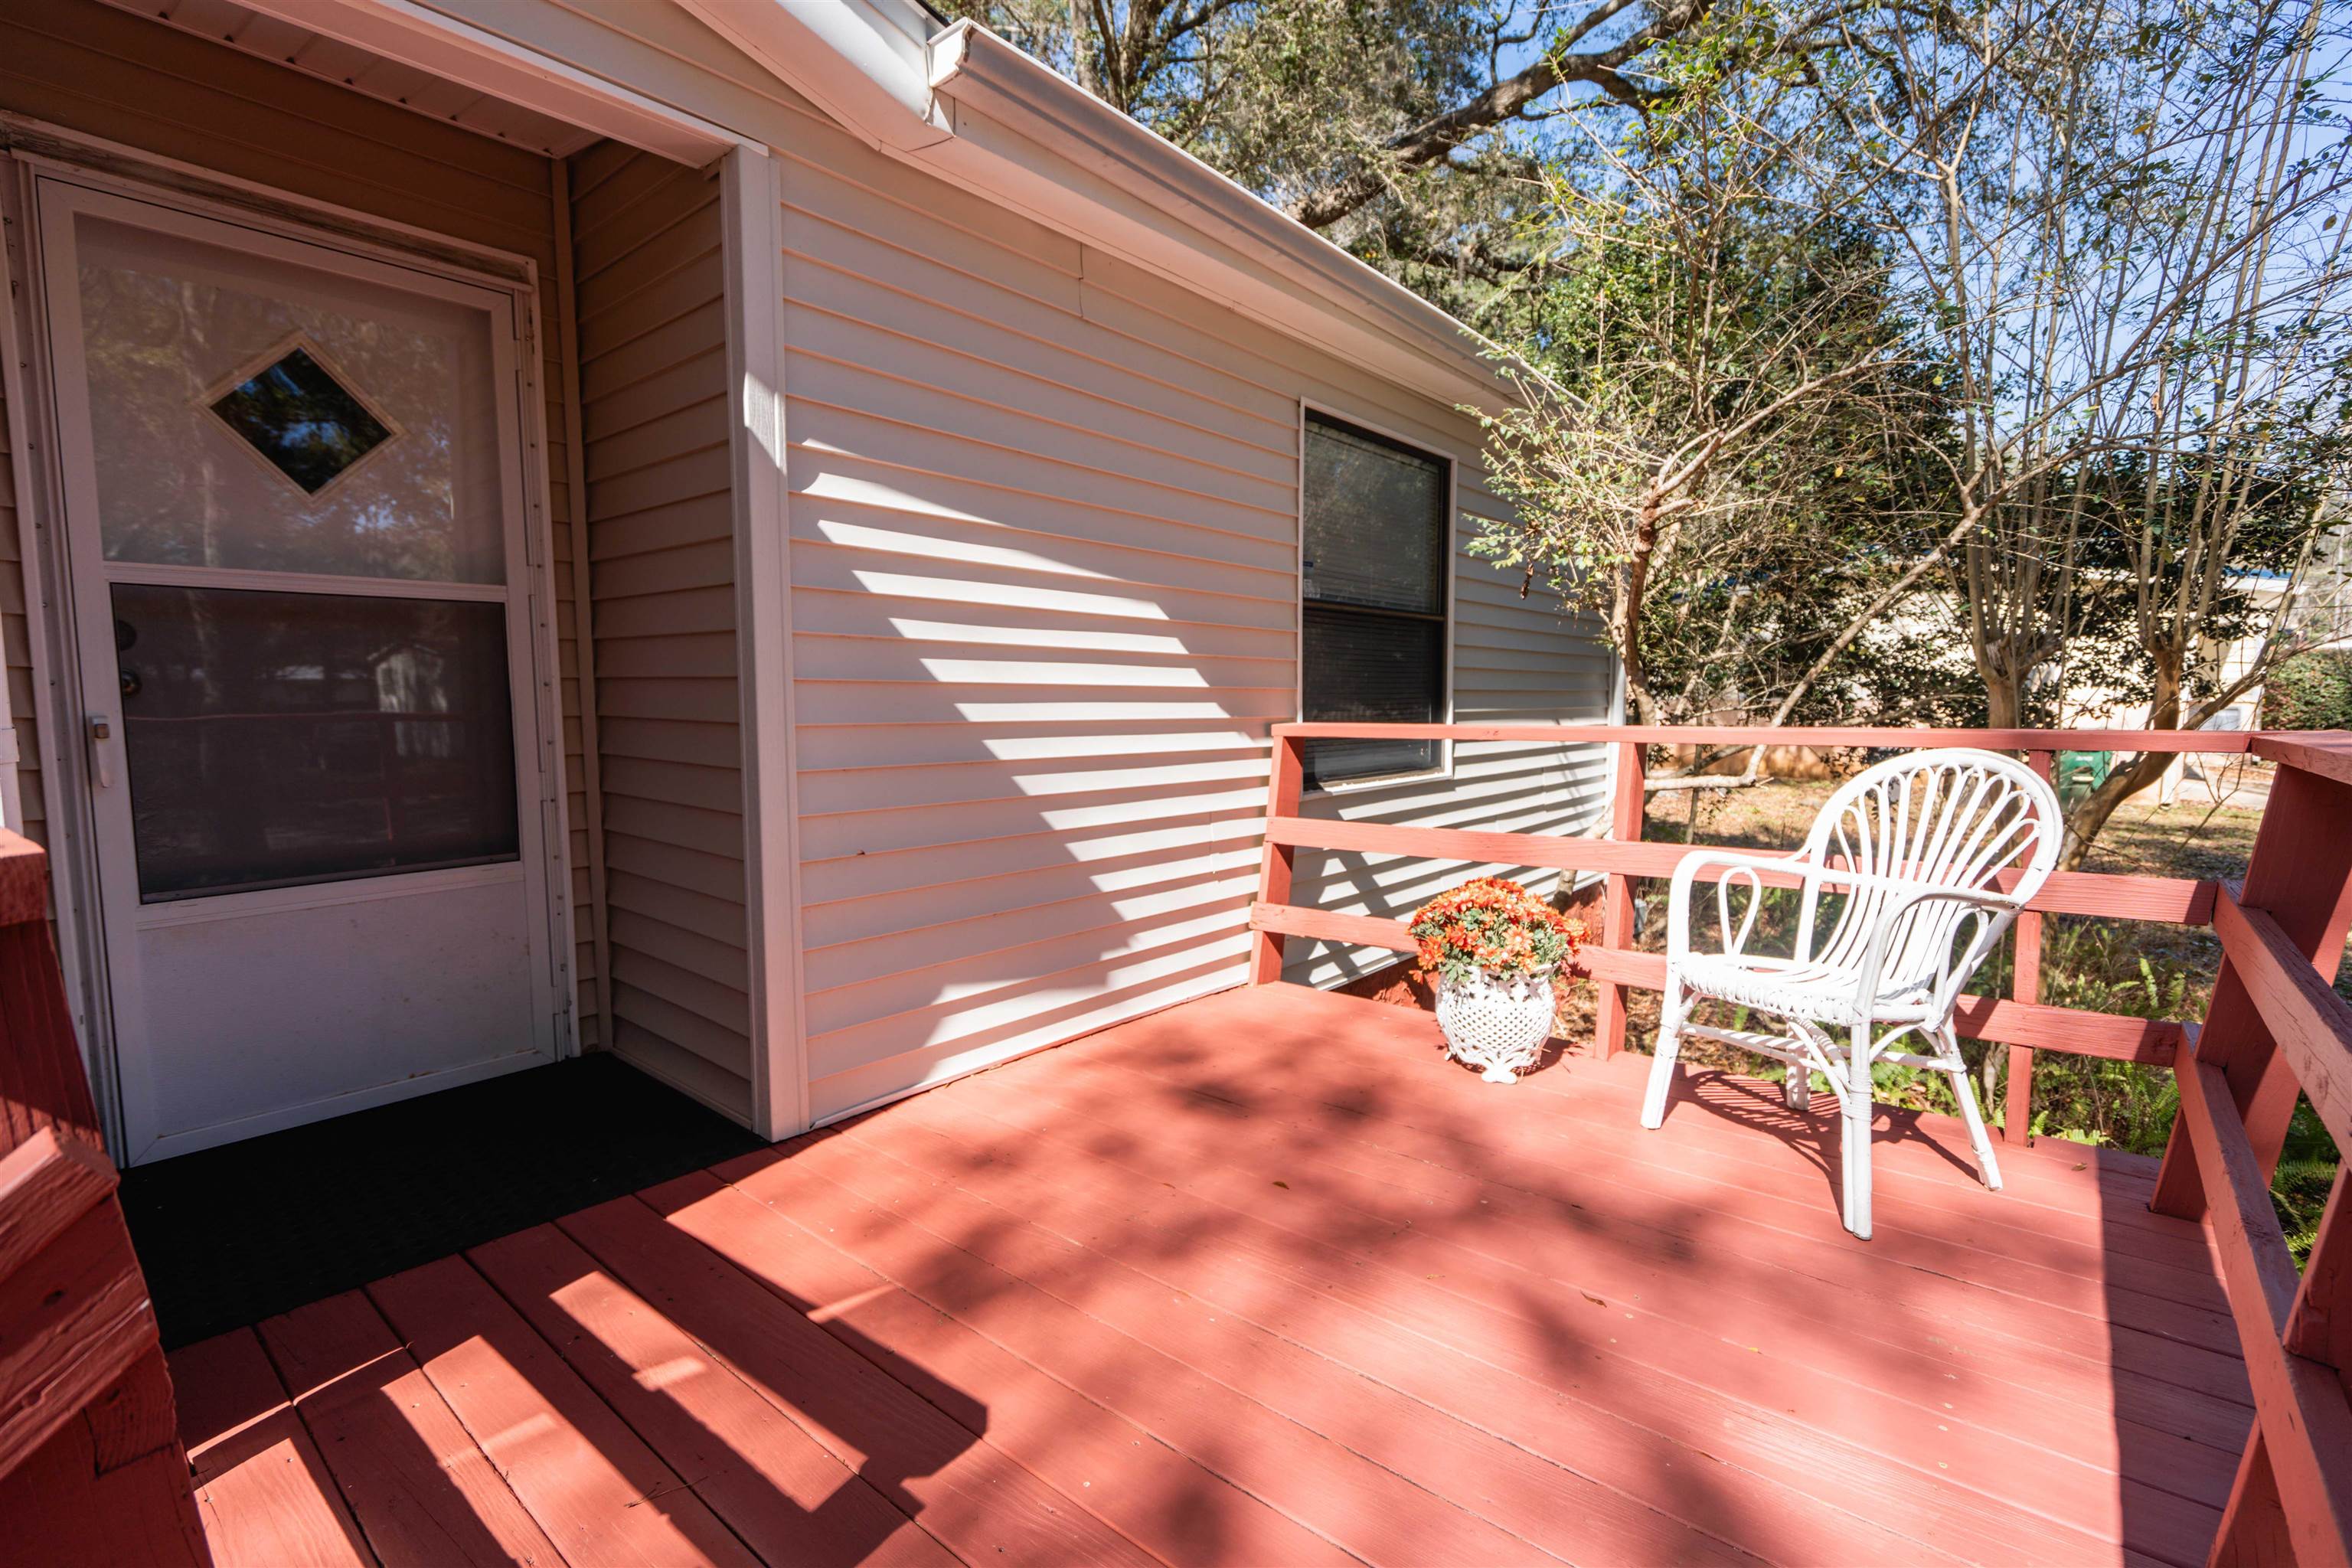 2032 Plantation Forest Drive,TALLAHASSEE,Florida 32317,3 Bedrooms Bedrooms,2 BathroomsBathrooms,Manuf/mobile home,2032 Plantation Forest Drive,368544